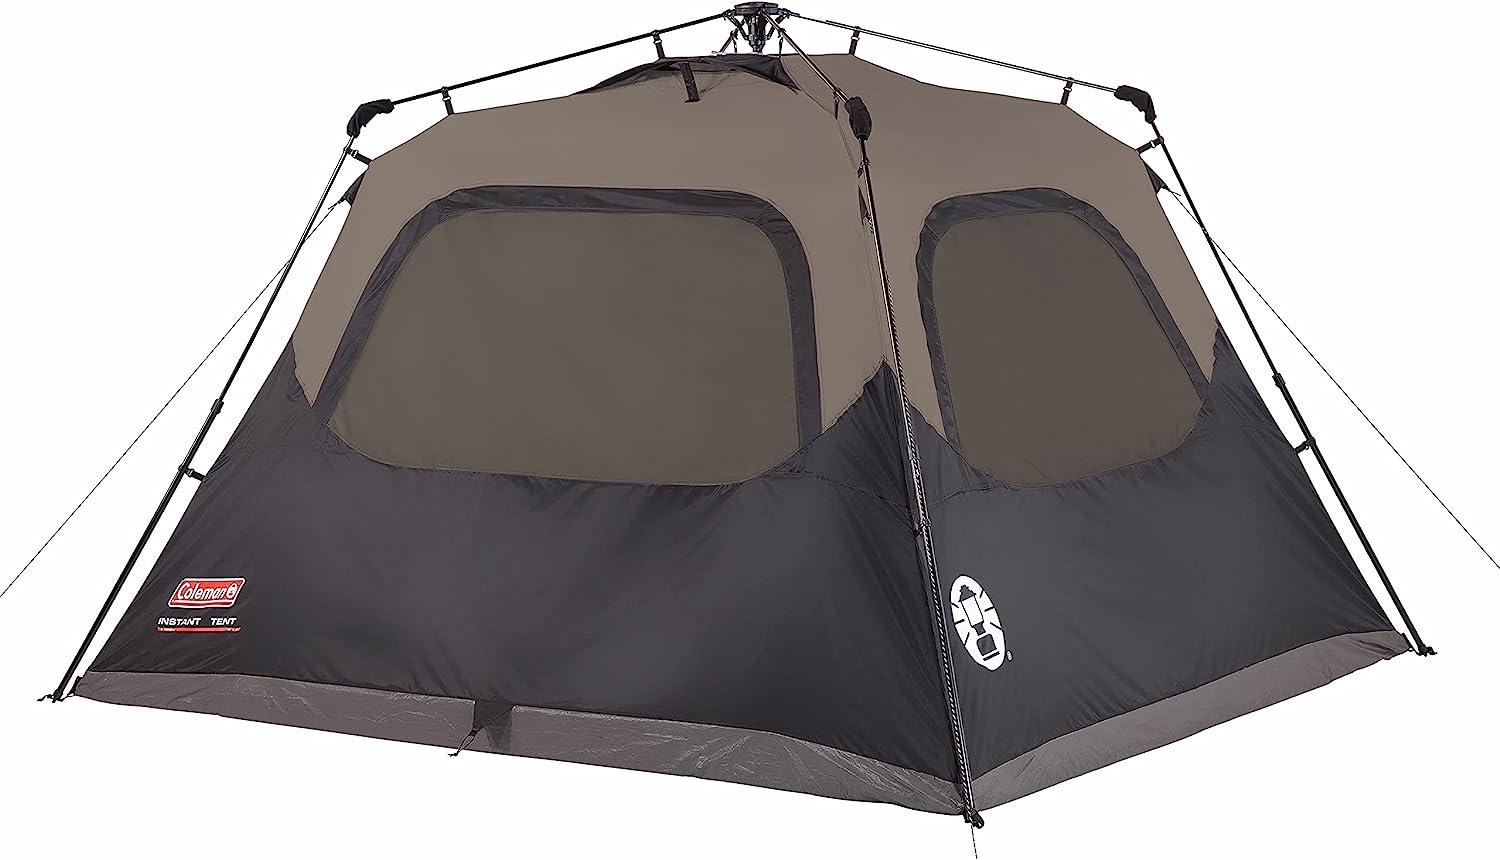 Coleman Camping Tent with Instant Setup for $87 Shipped